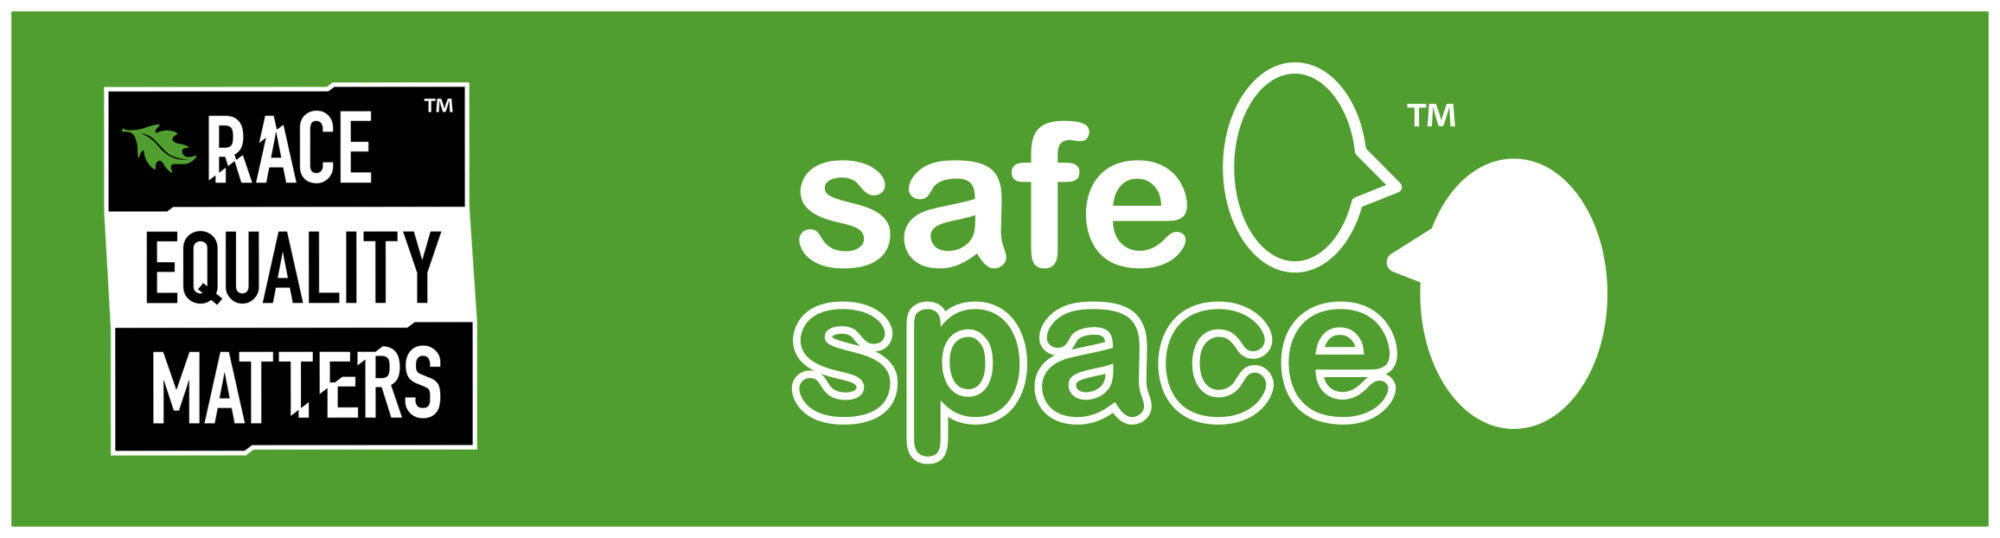 Safe Space logo, white lettering with green background